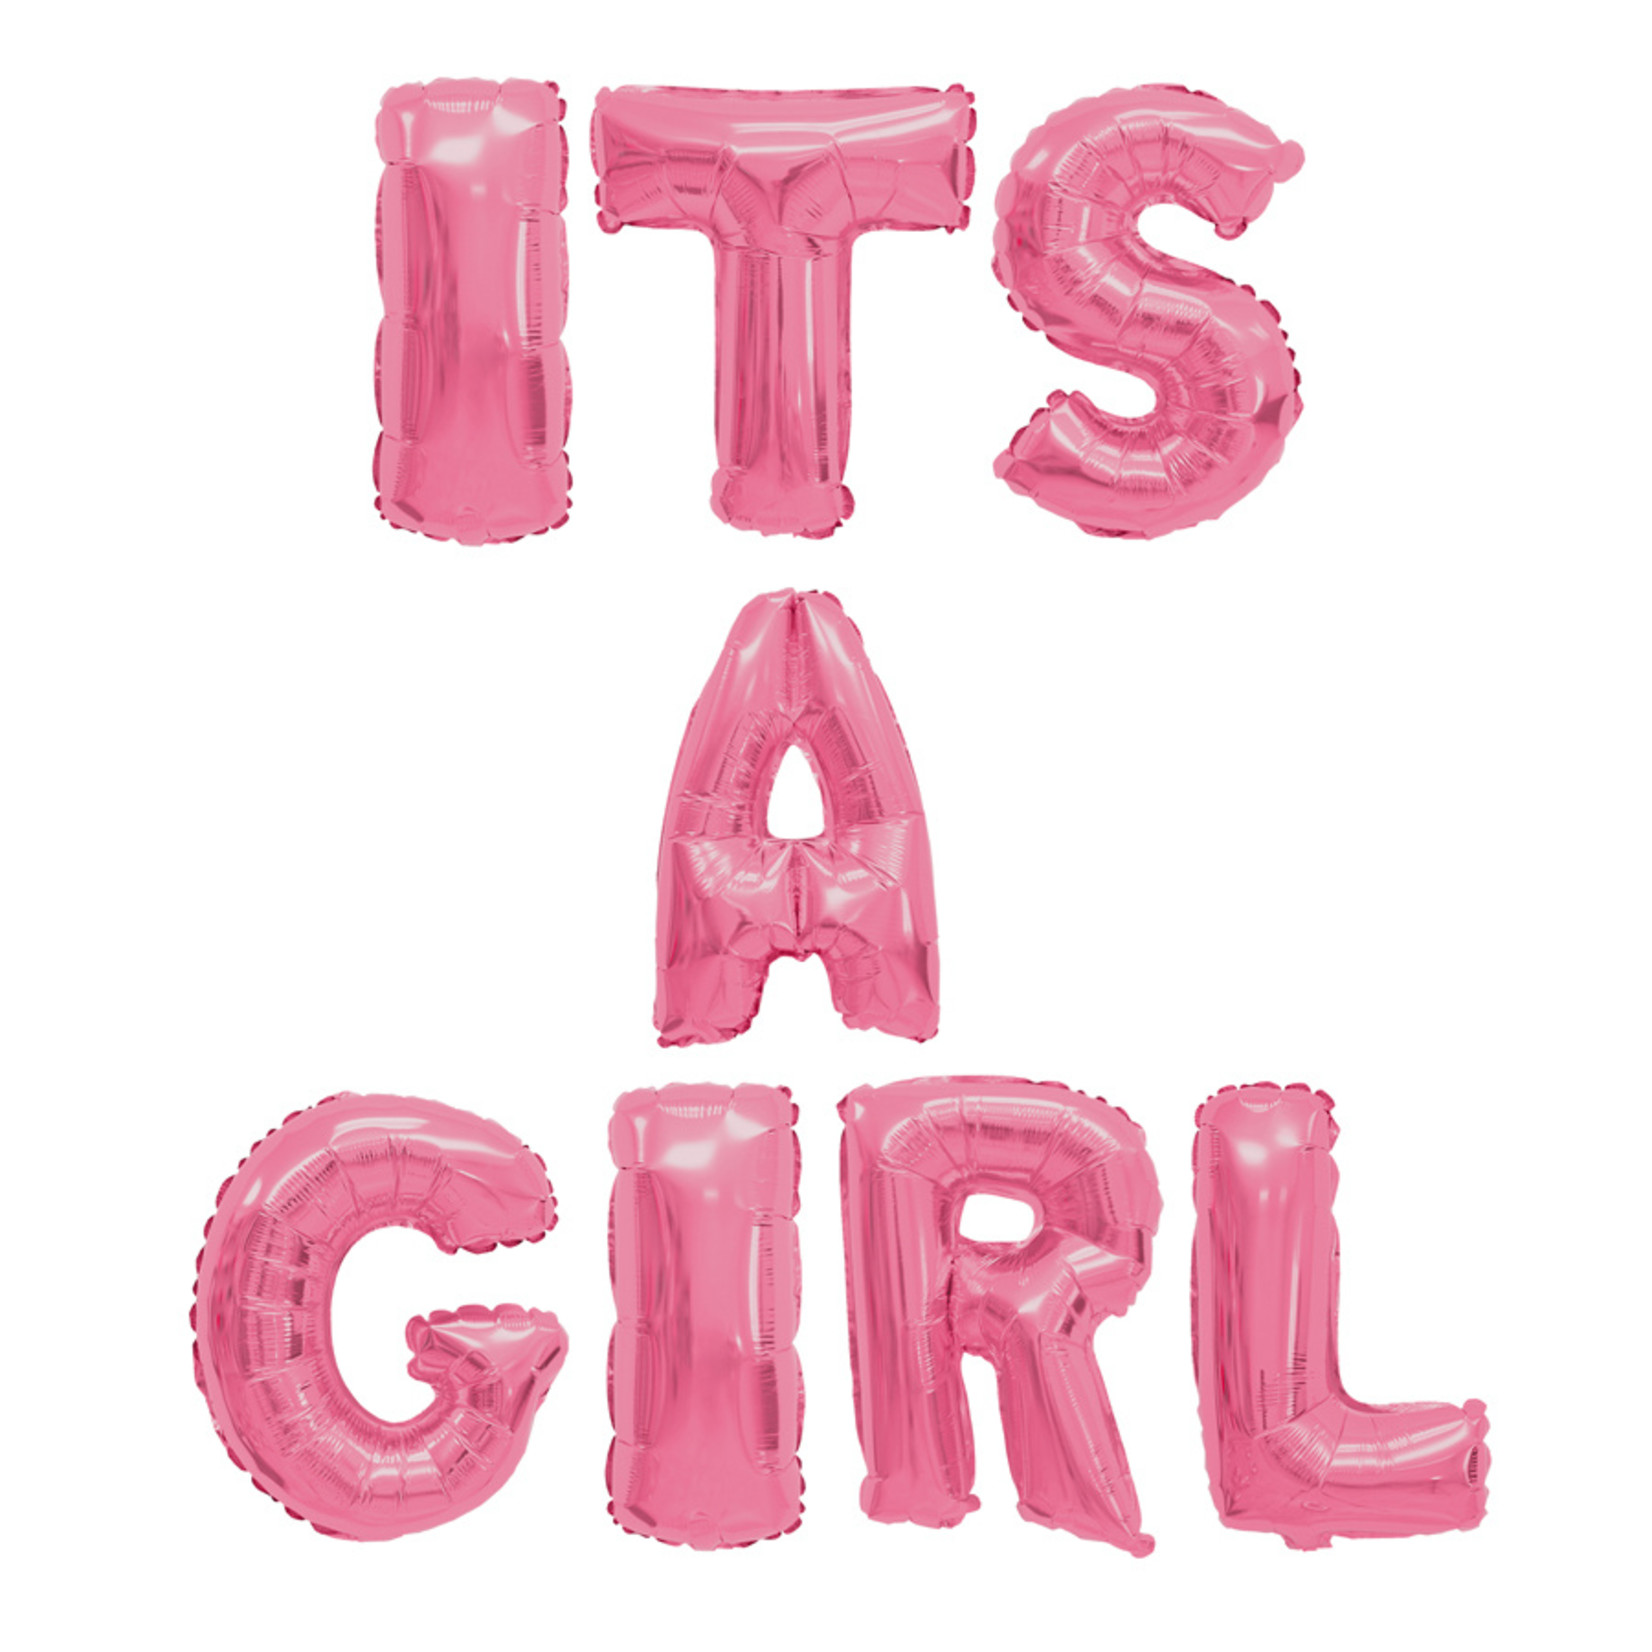 16" 'ITS A GIRL' Pink 8 pc